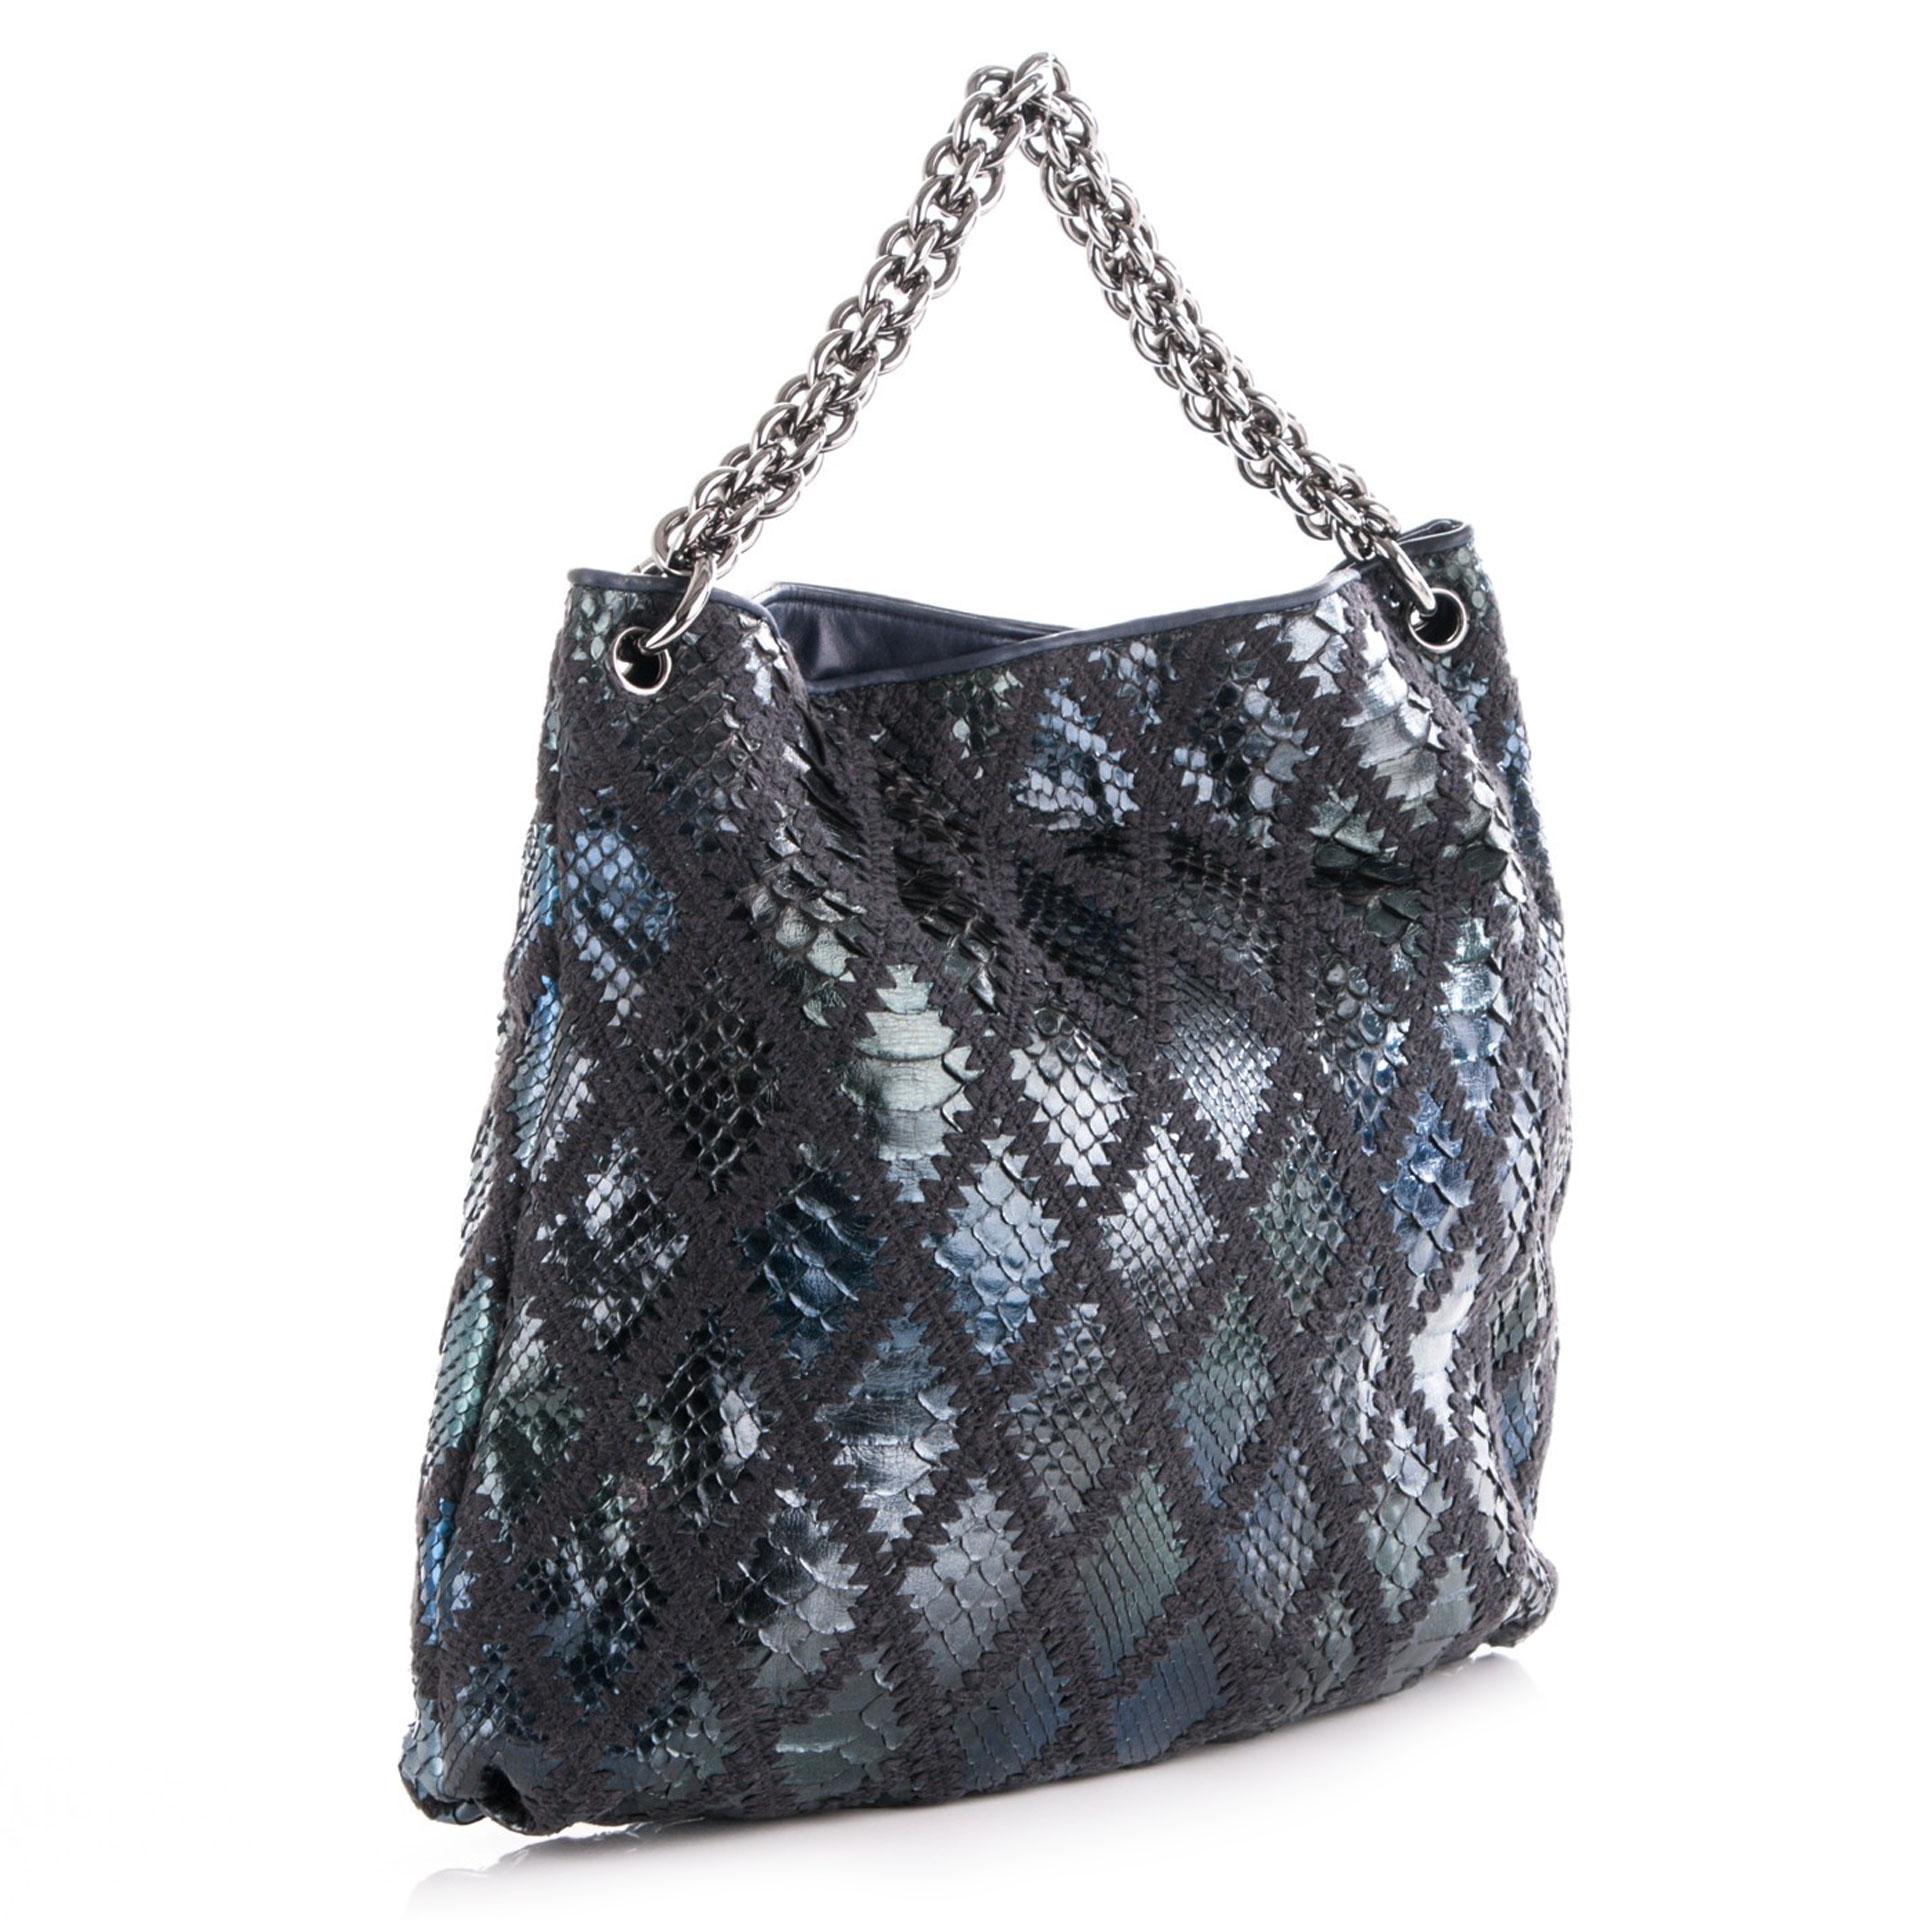 Chanel metallic blue exotic python hobo with chunky chain handle.

2007 {VINTAGE 15 Years}
Silver hardware
Metallic blue python 
Crochet diamond stitching
Thick chunky chain detail
17